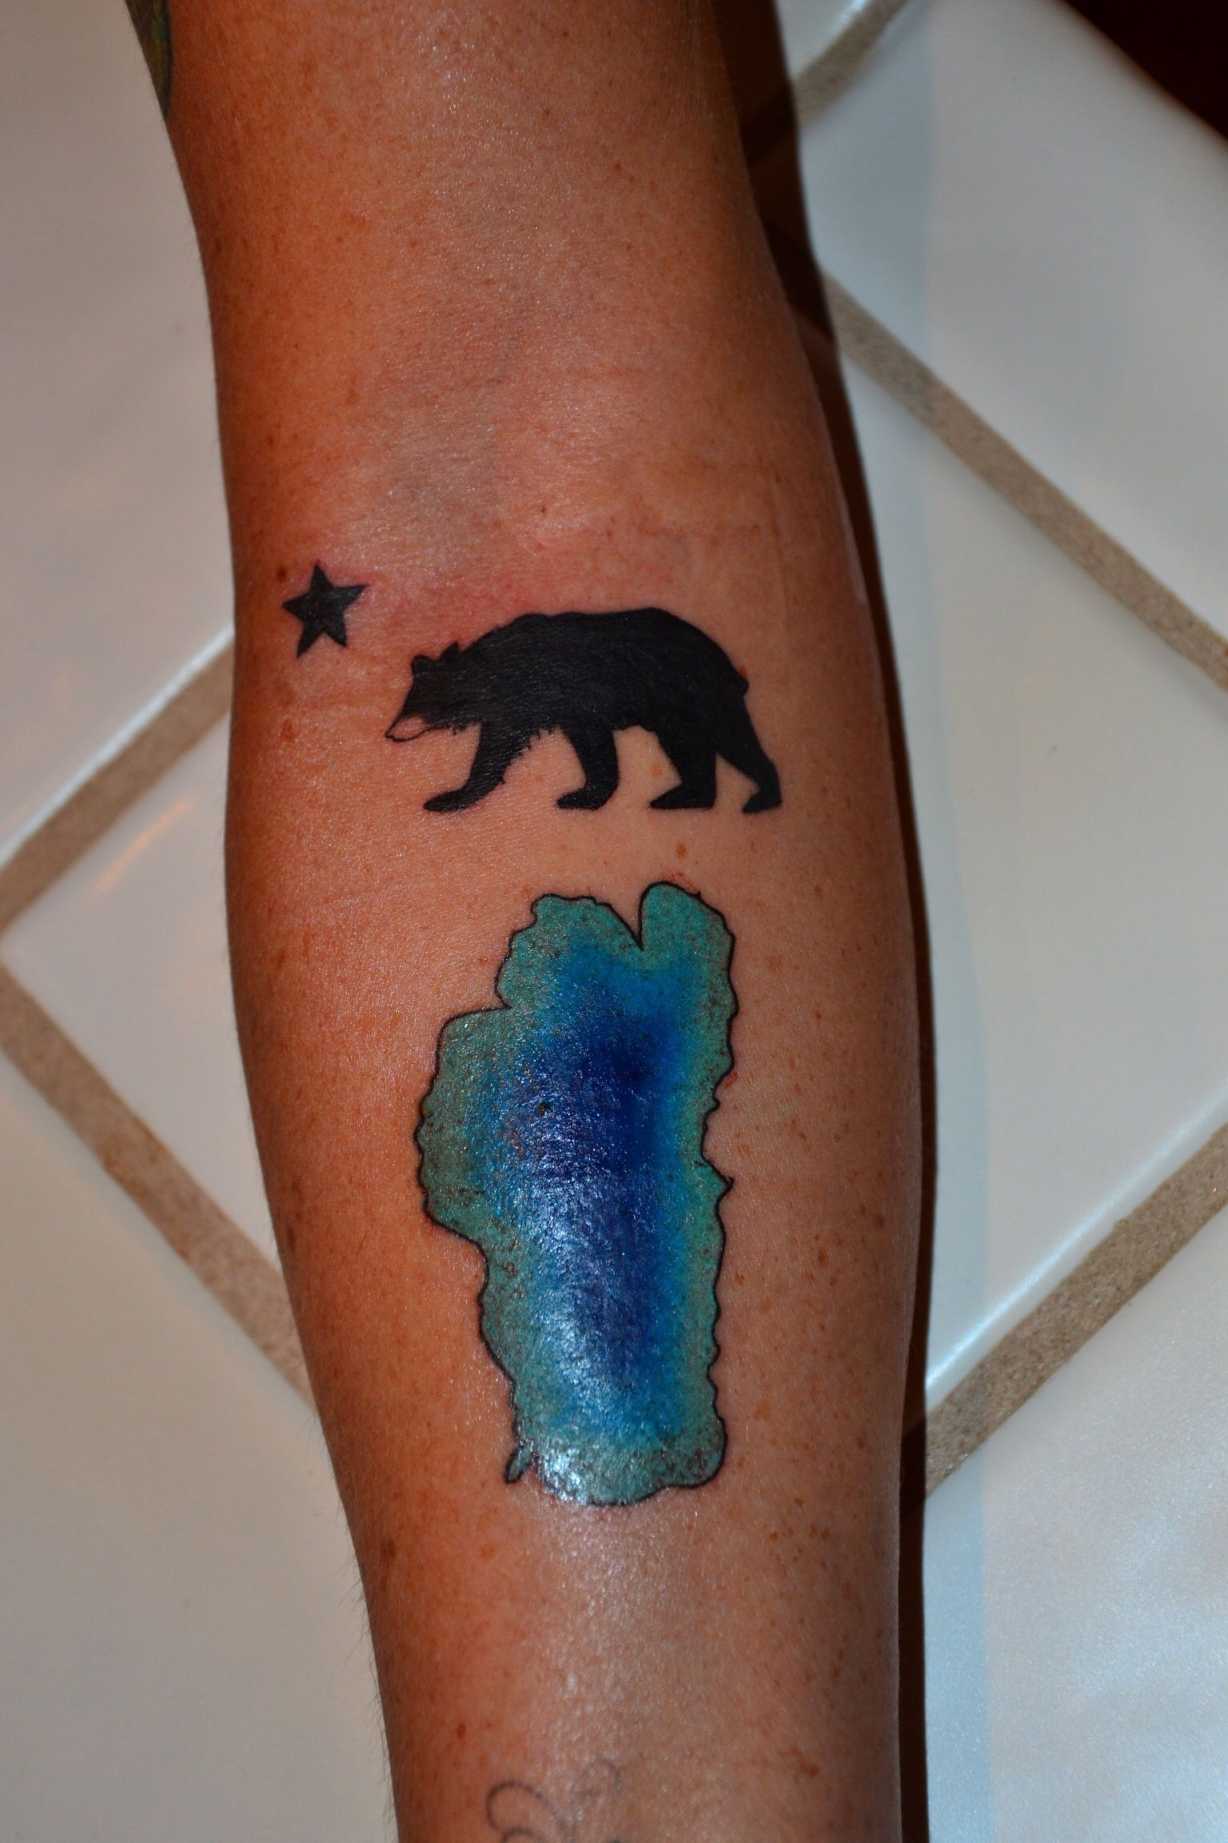 I want the outline of lake tahoe as my tattooMIND CHANGED